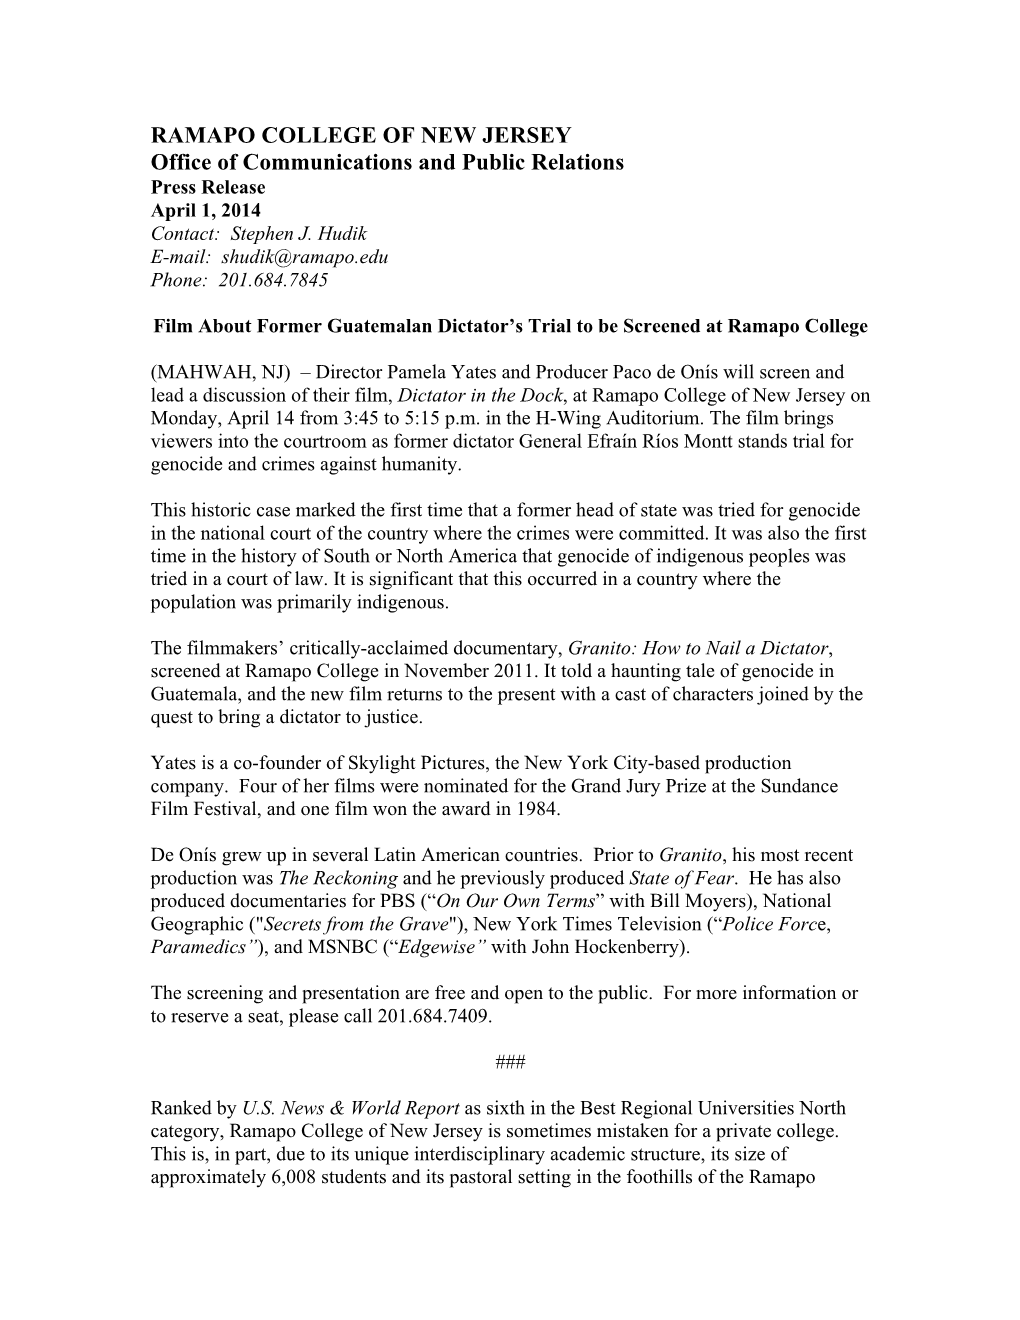 RAMAPO COLLEGE of NEW JERSEY Office of Communications and Public Relations Press Release April 1, 2014 Contact: Stephen J